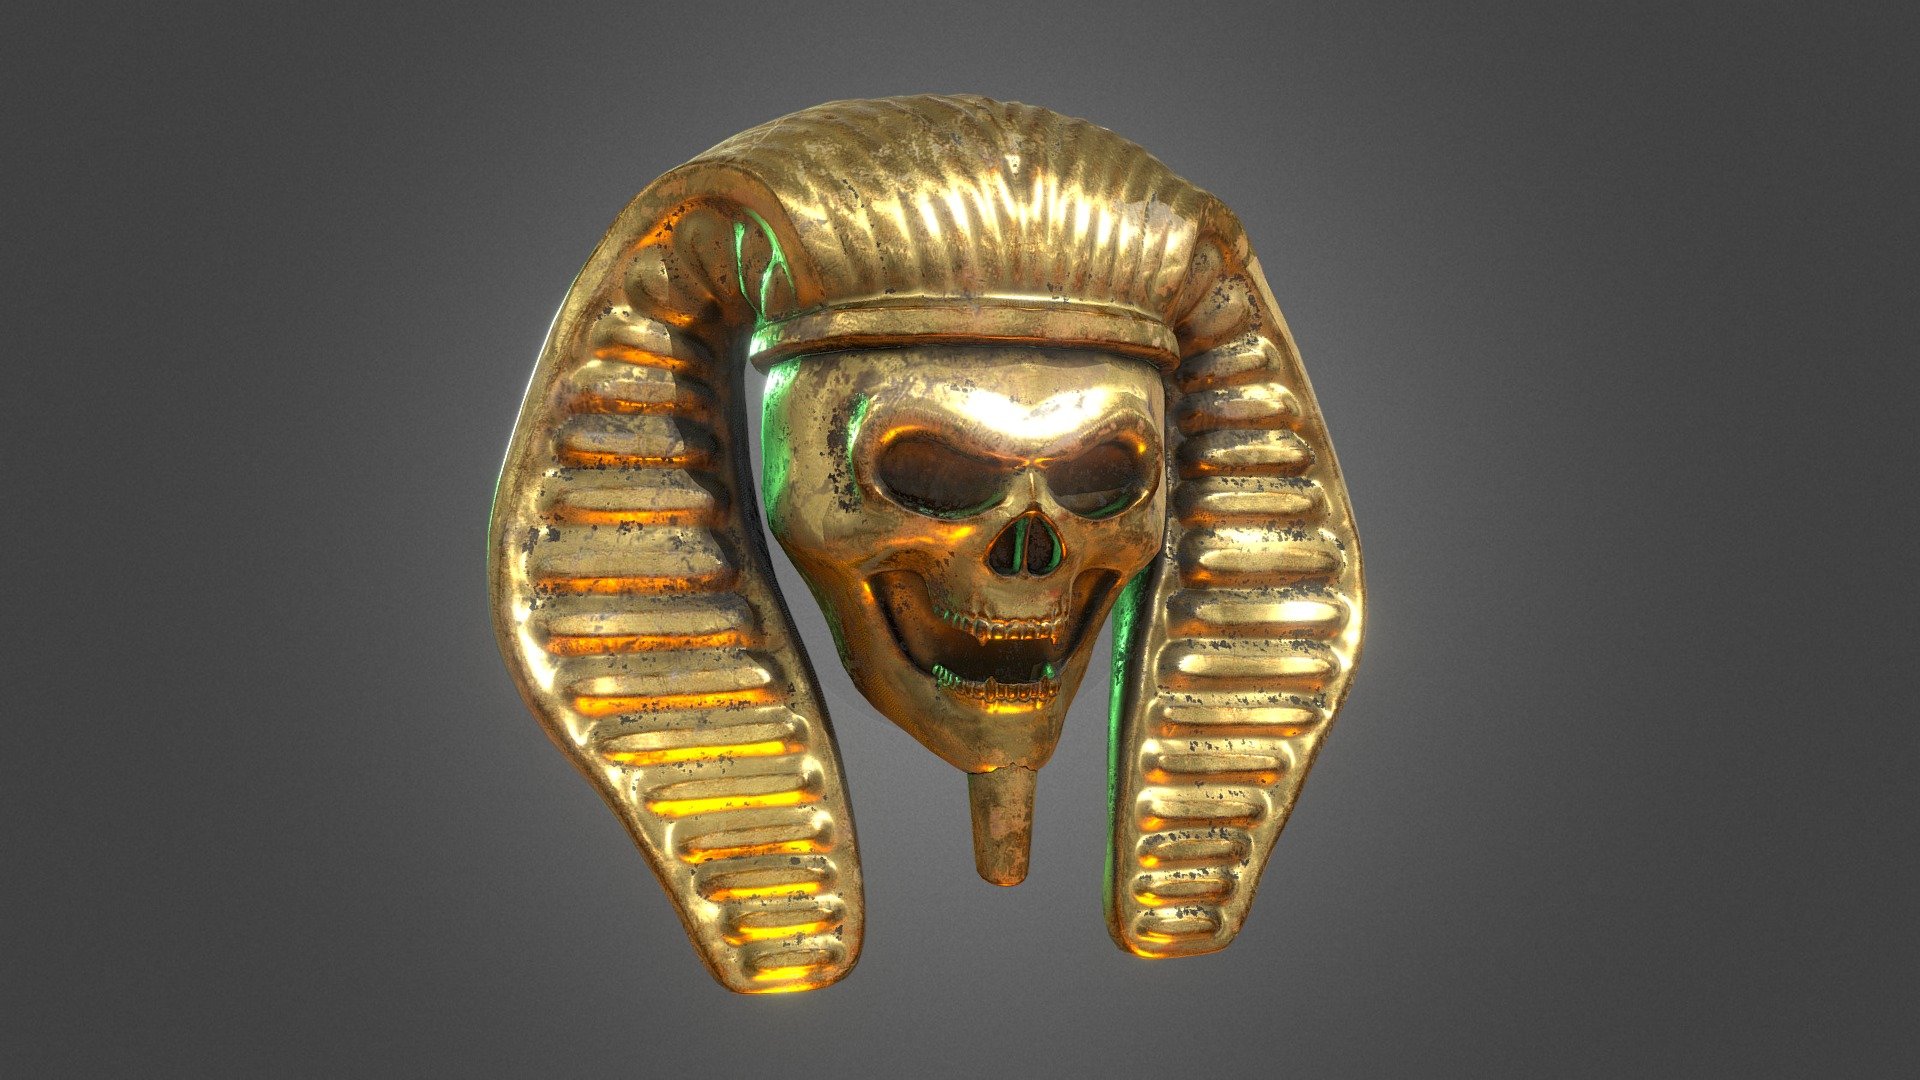 This is a game character mask prop that I created using Blender, with the Egyptian Pharaoh as a reference.

To facilitate importing into a game engine, I utilized the PBR workflow to create it.

Its materials are composed of four PBR textures: BaseColor, Metalness, Roughness, and Normal,

which can be imported directly into the game engine and render fantastic results immediately 3d model